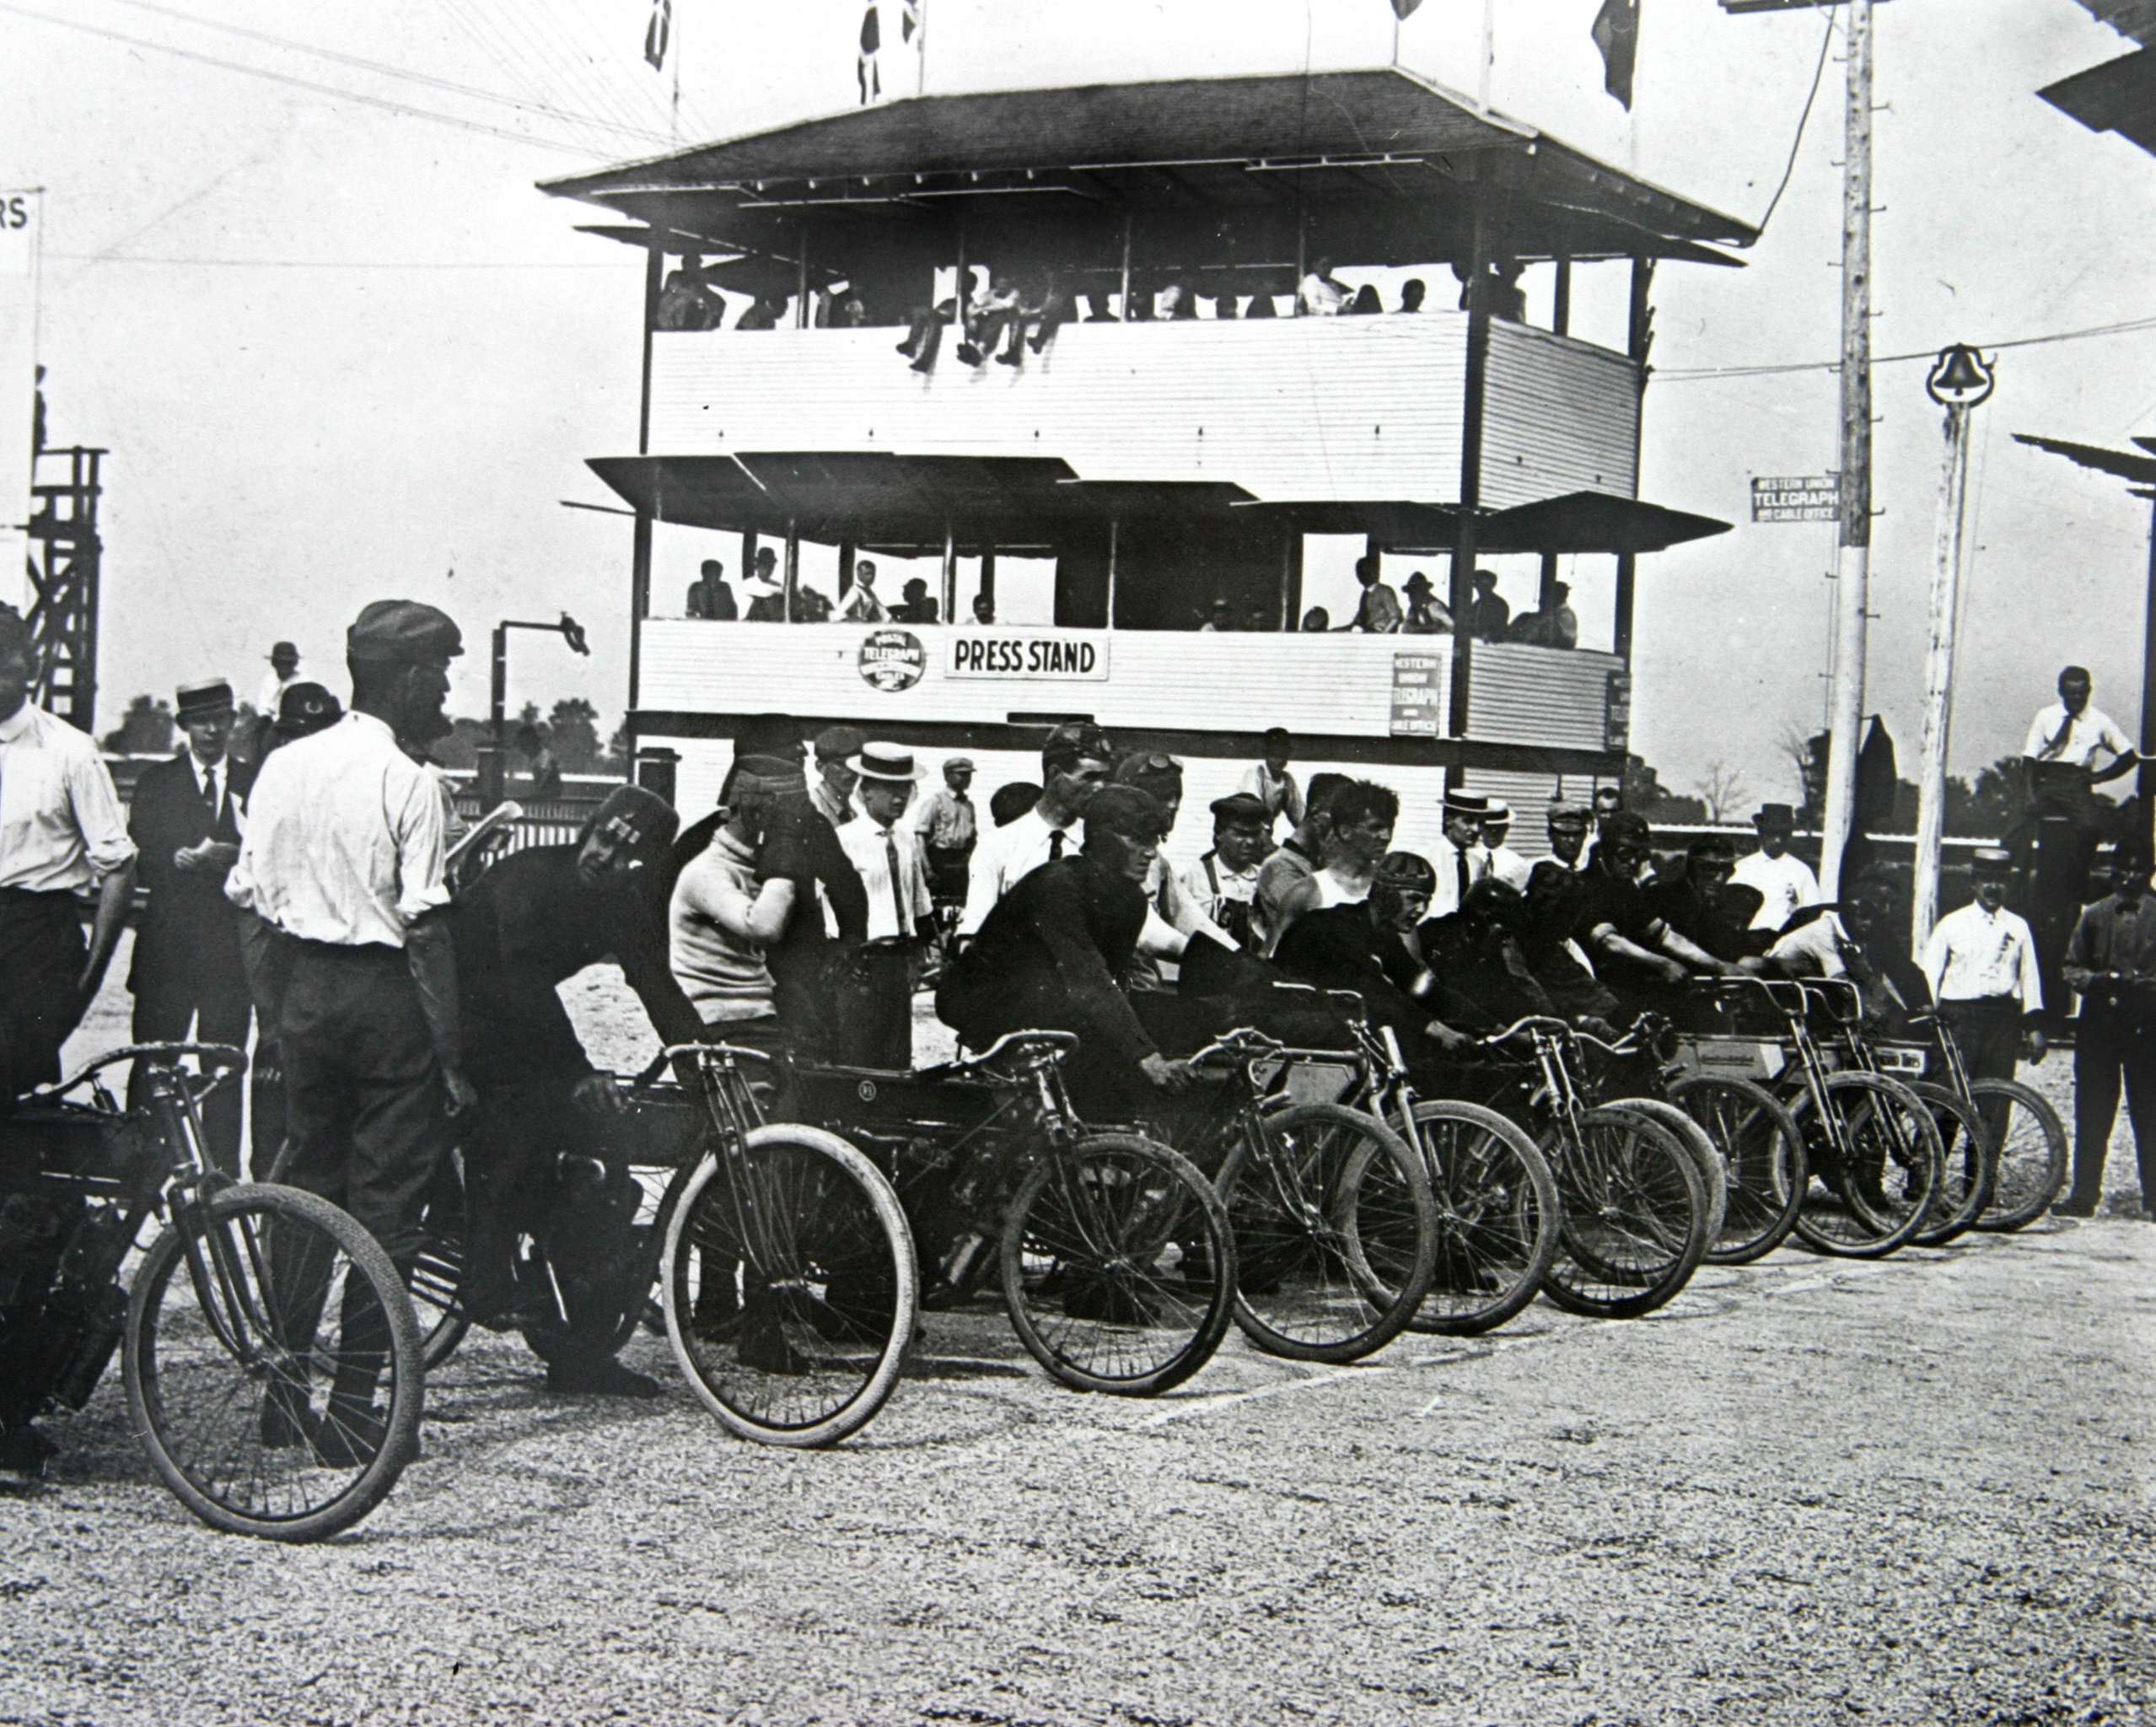 The first competitions at the Indianapolis Motor Speedway were a balloon endurance race and a motorcycle race in 1909. (Provided Image/Indianapolis Motor Speedway)